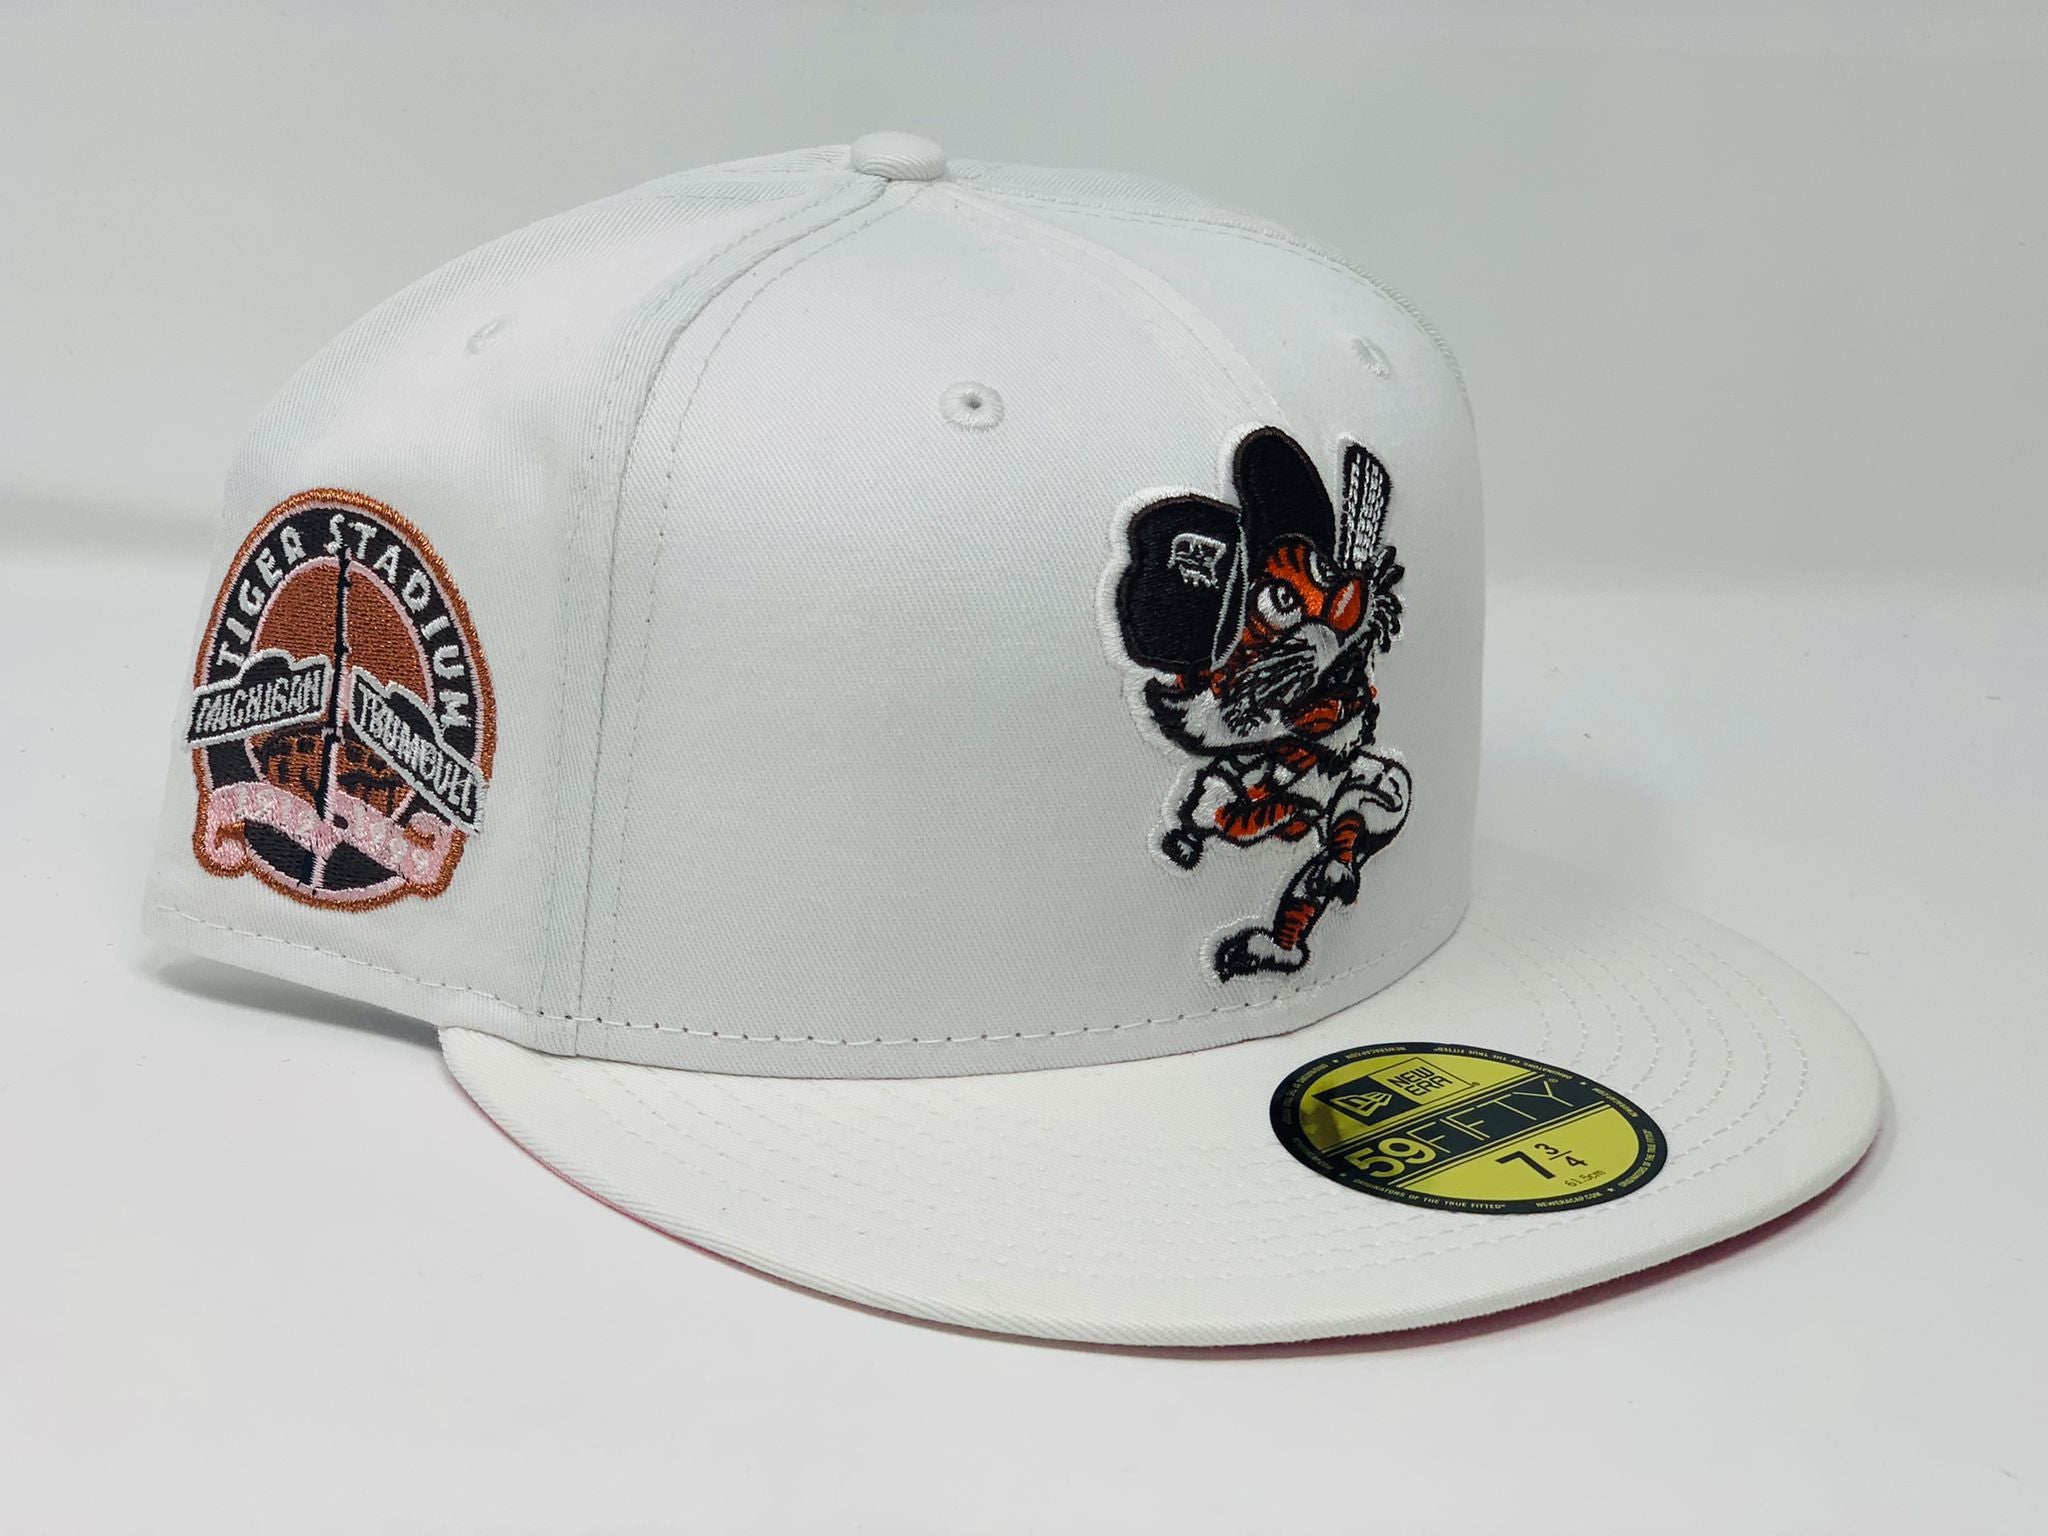 Detroit Tigers New Era Optic Stadium Patch 59FIFTY Fitted Hat - White